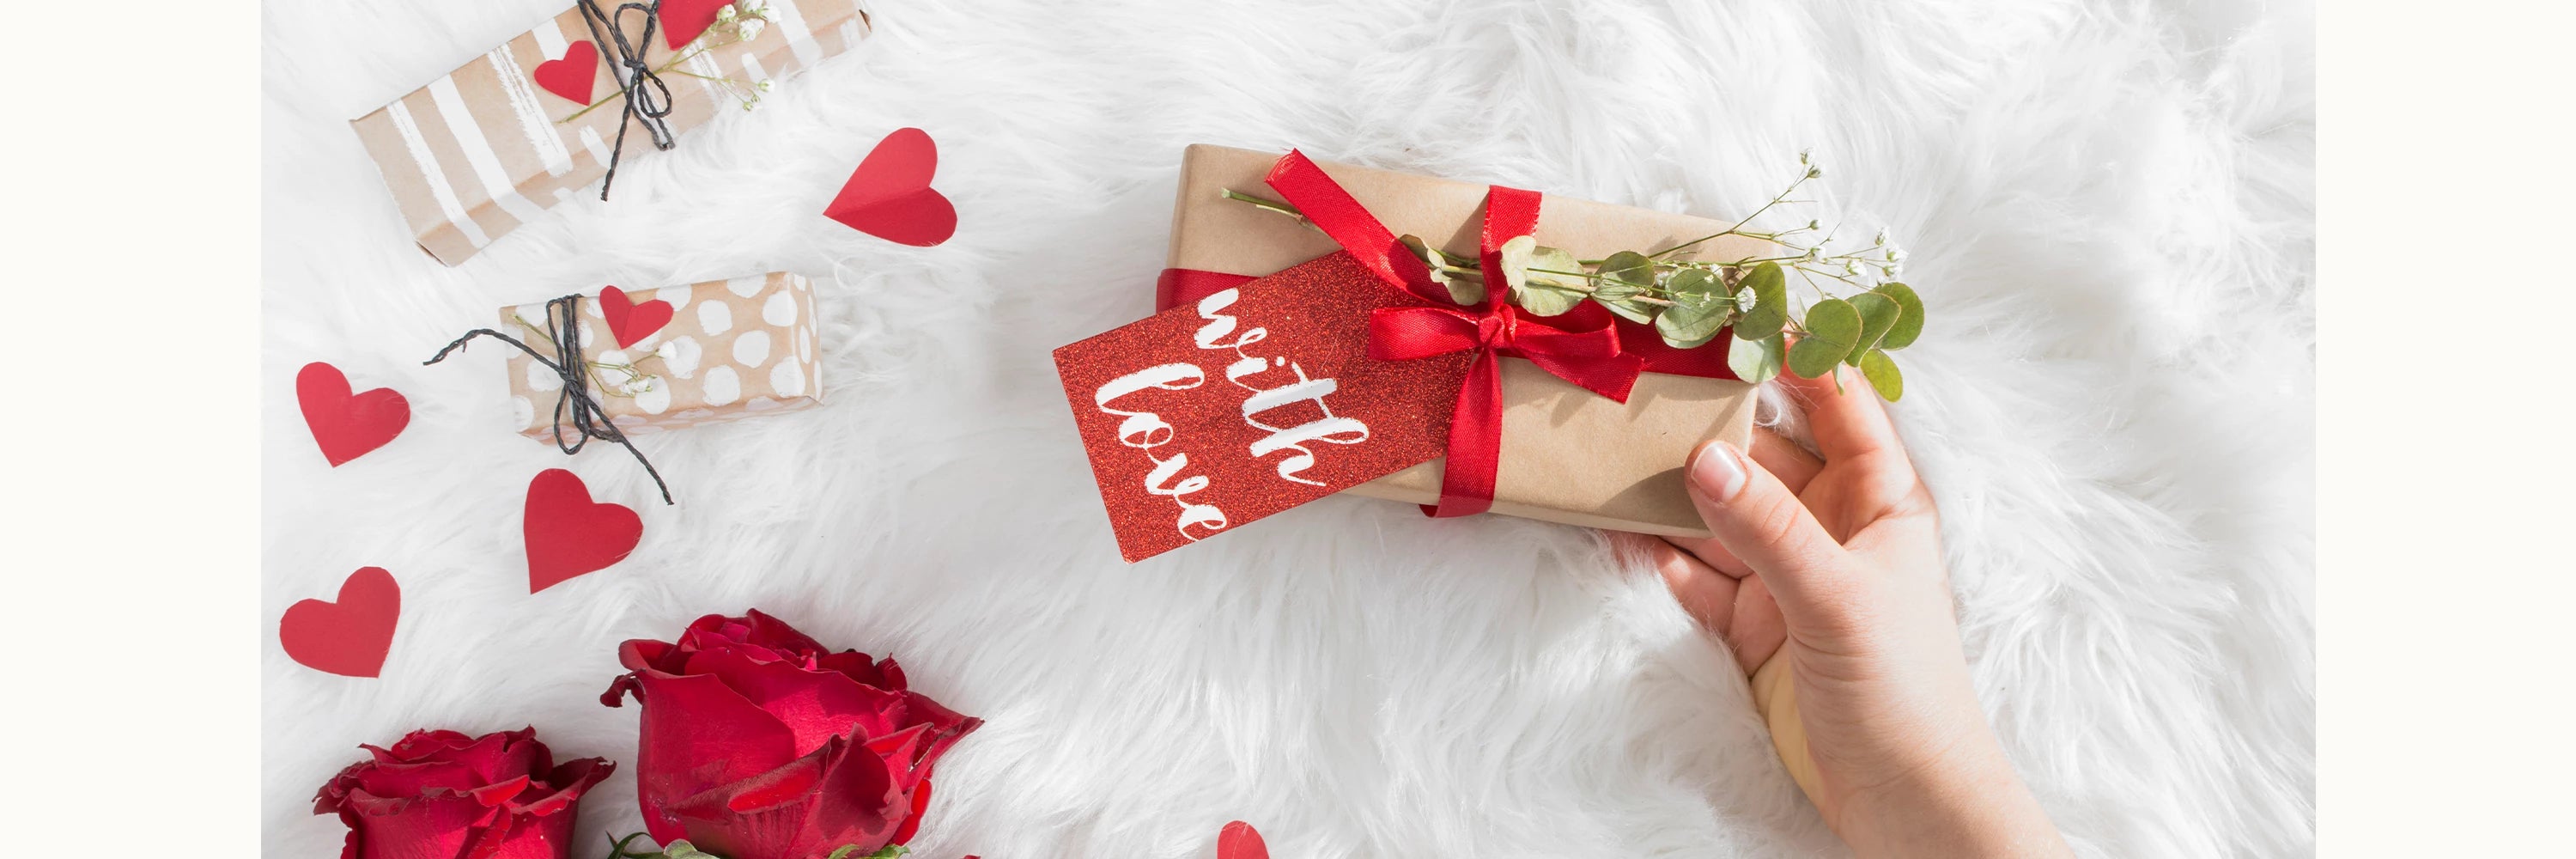 Best Gifts For Bride - Best Price By NewEleven